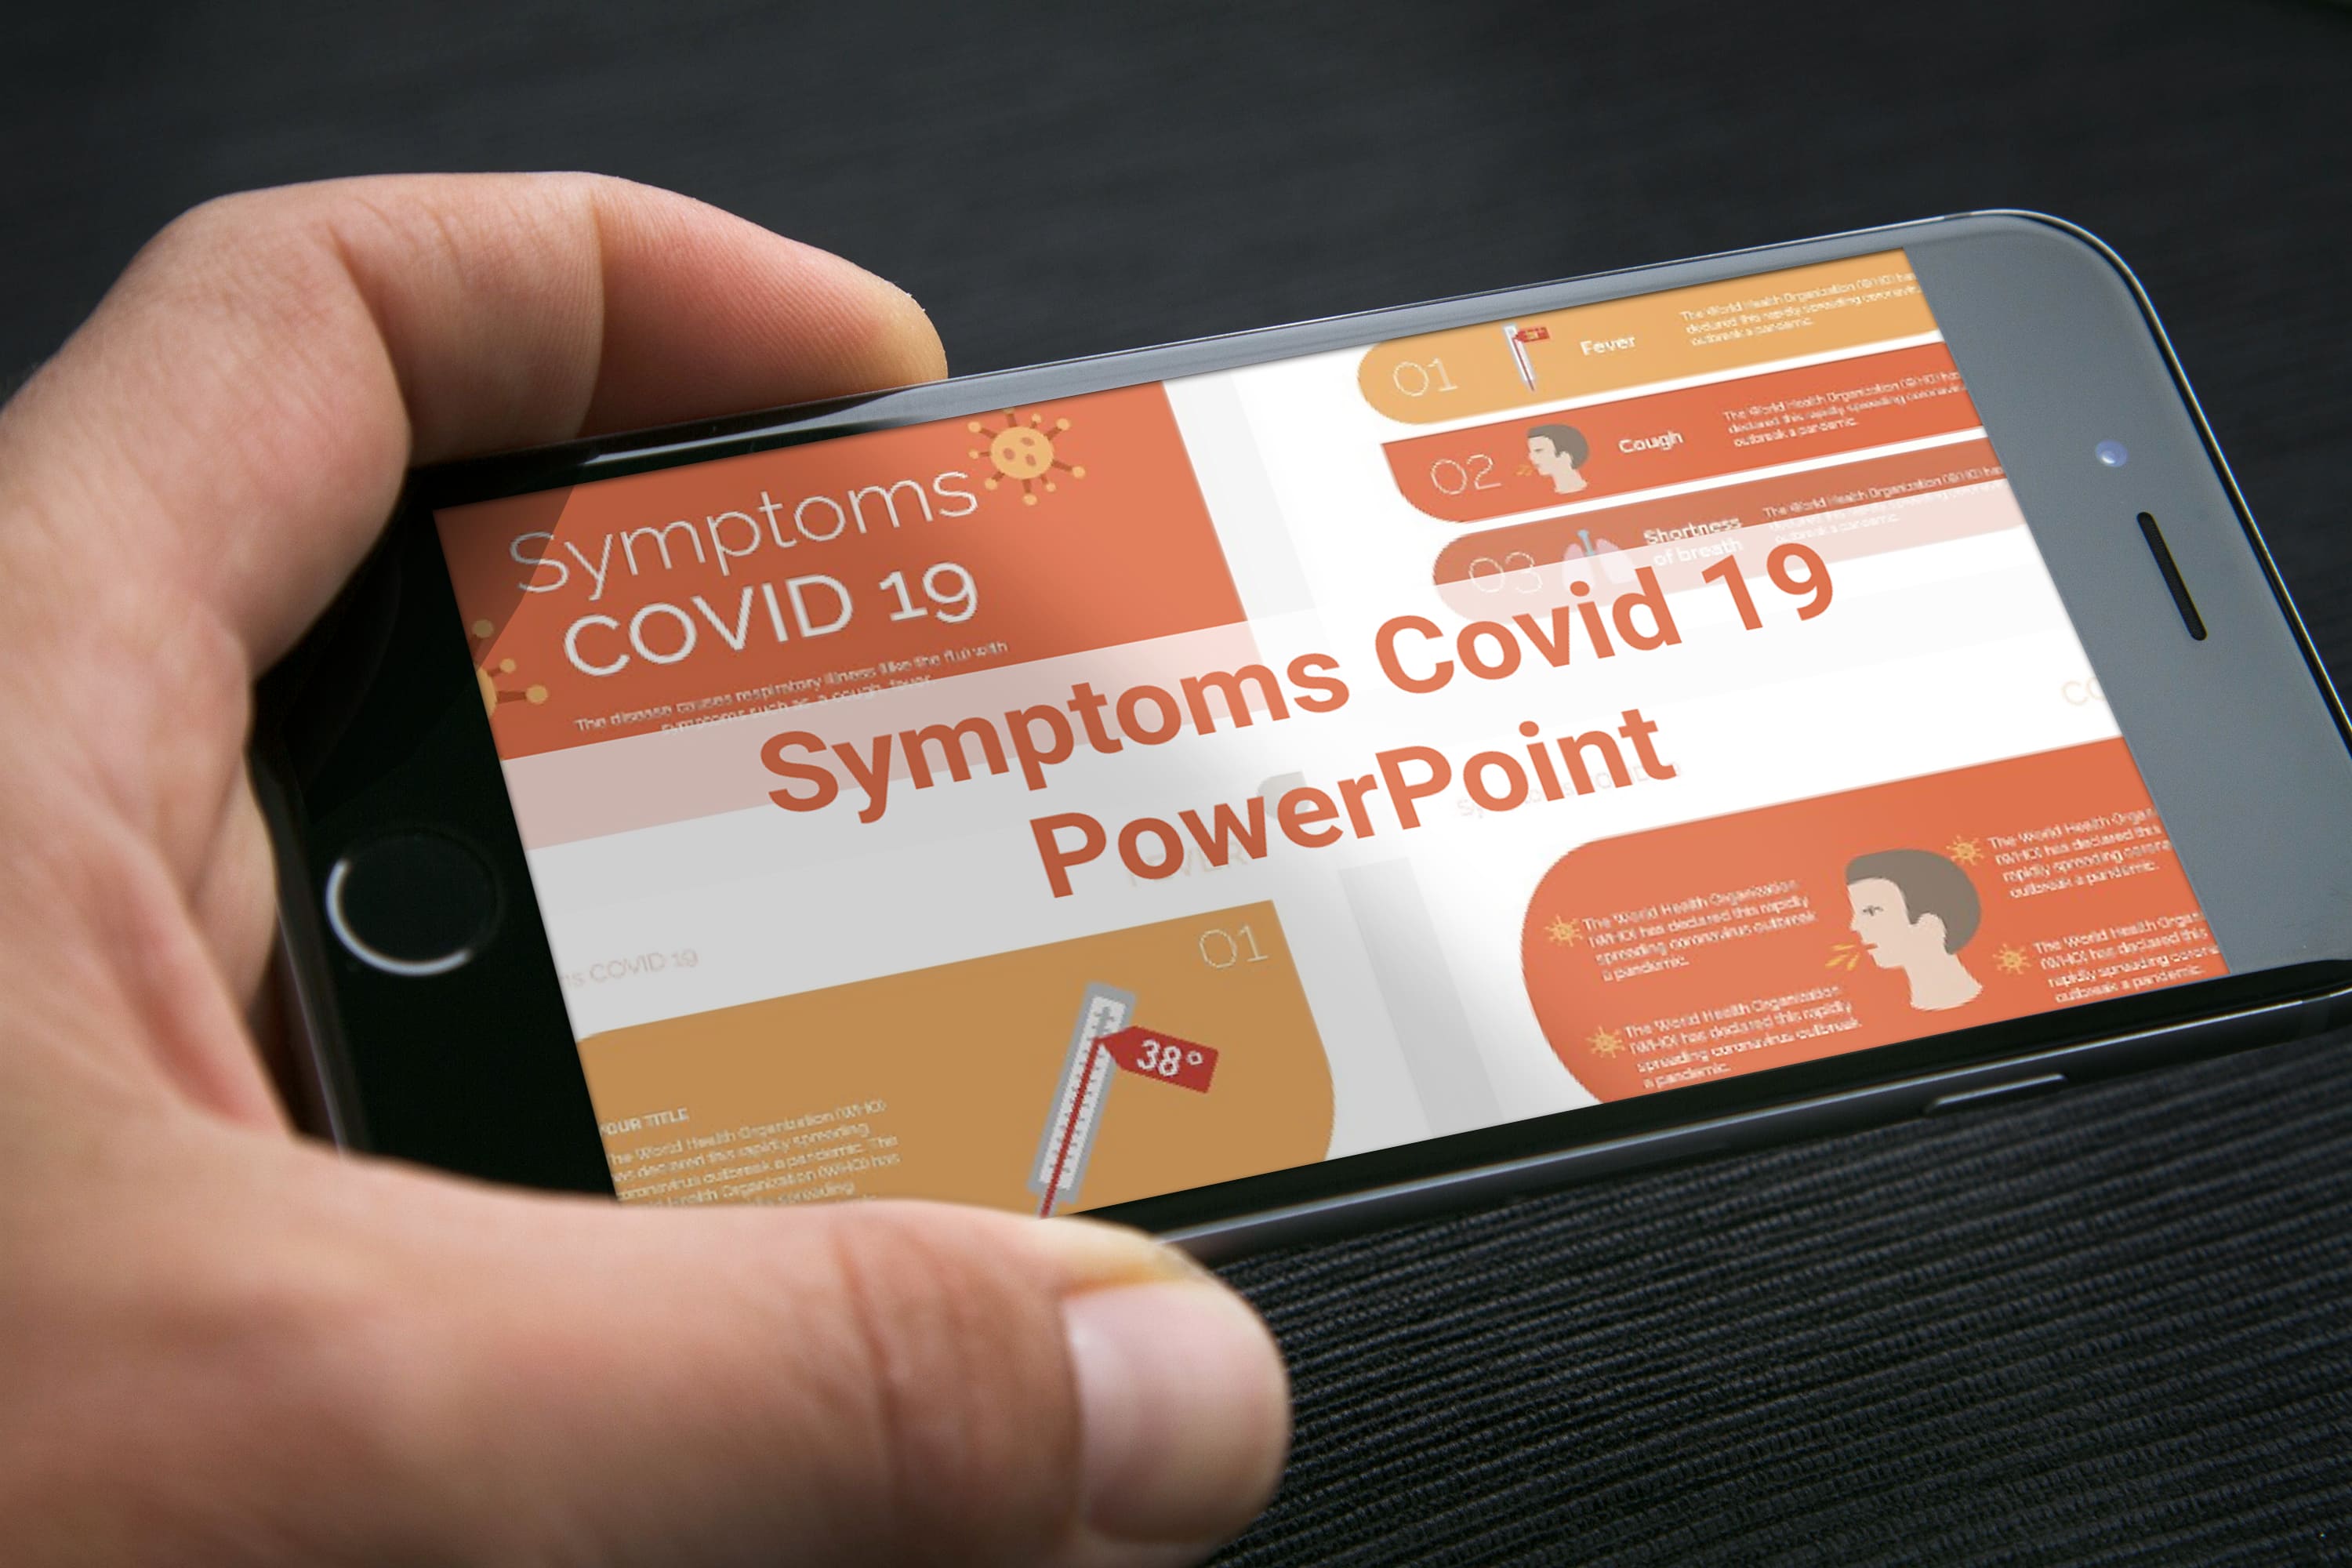 Mobile option of the Symptoms Covid 19 PowerPoint.